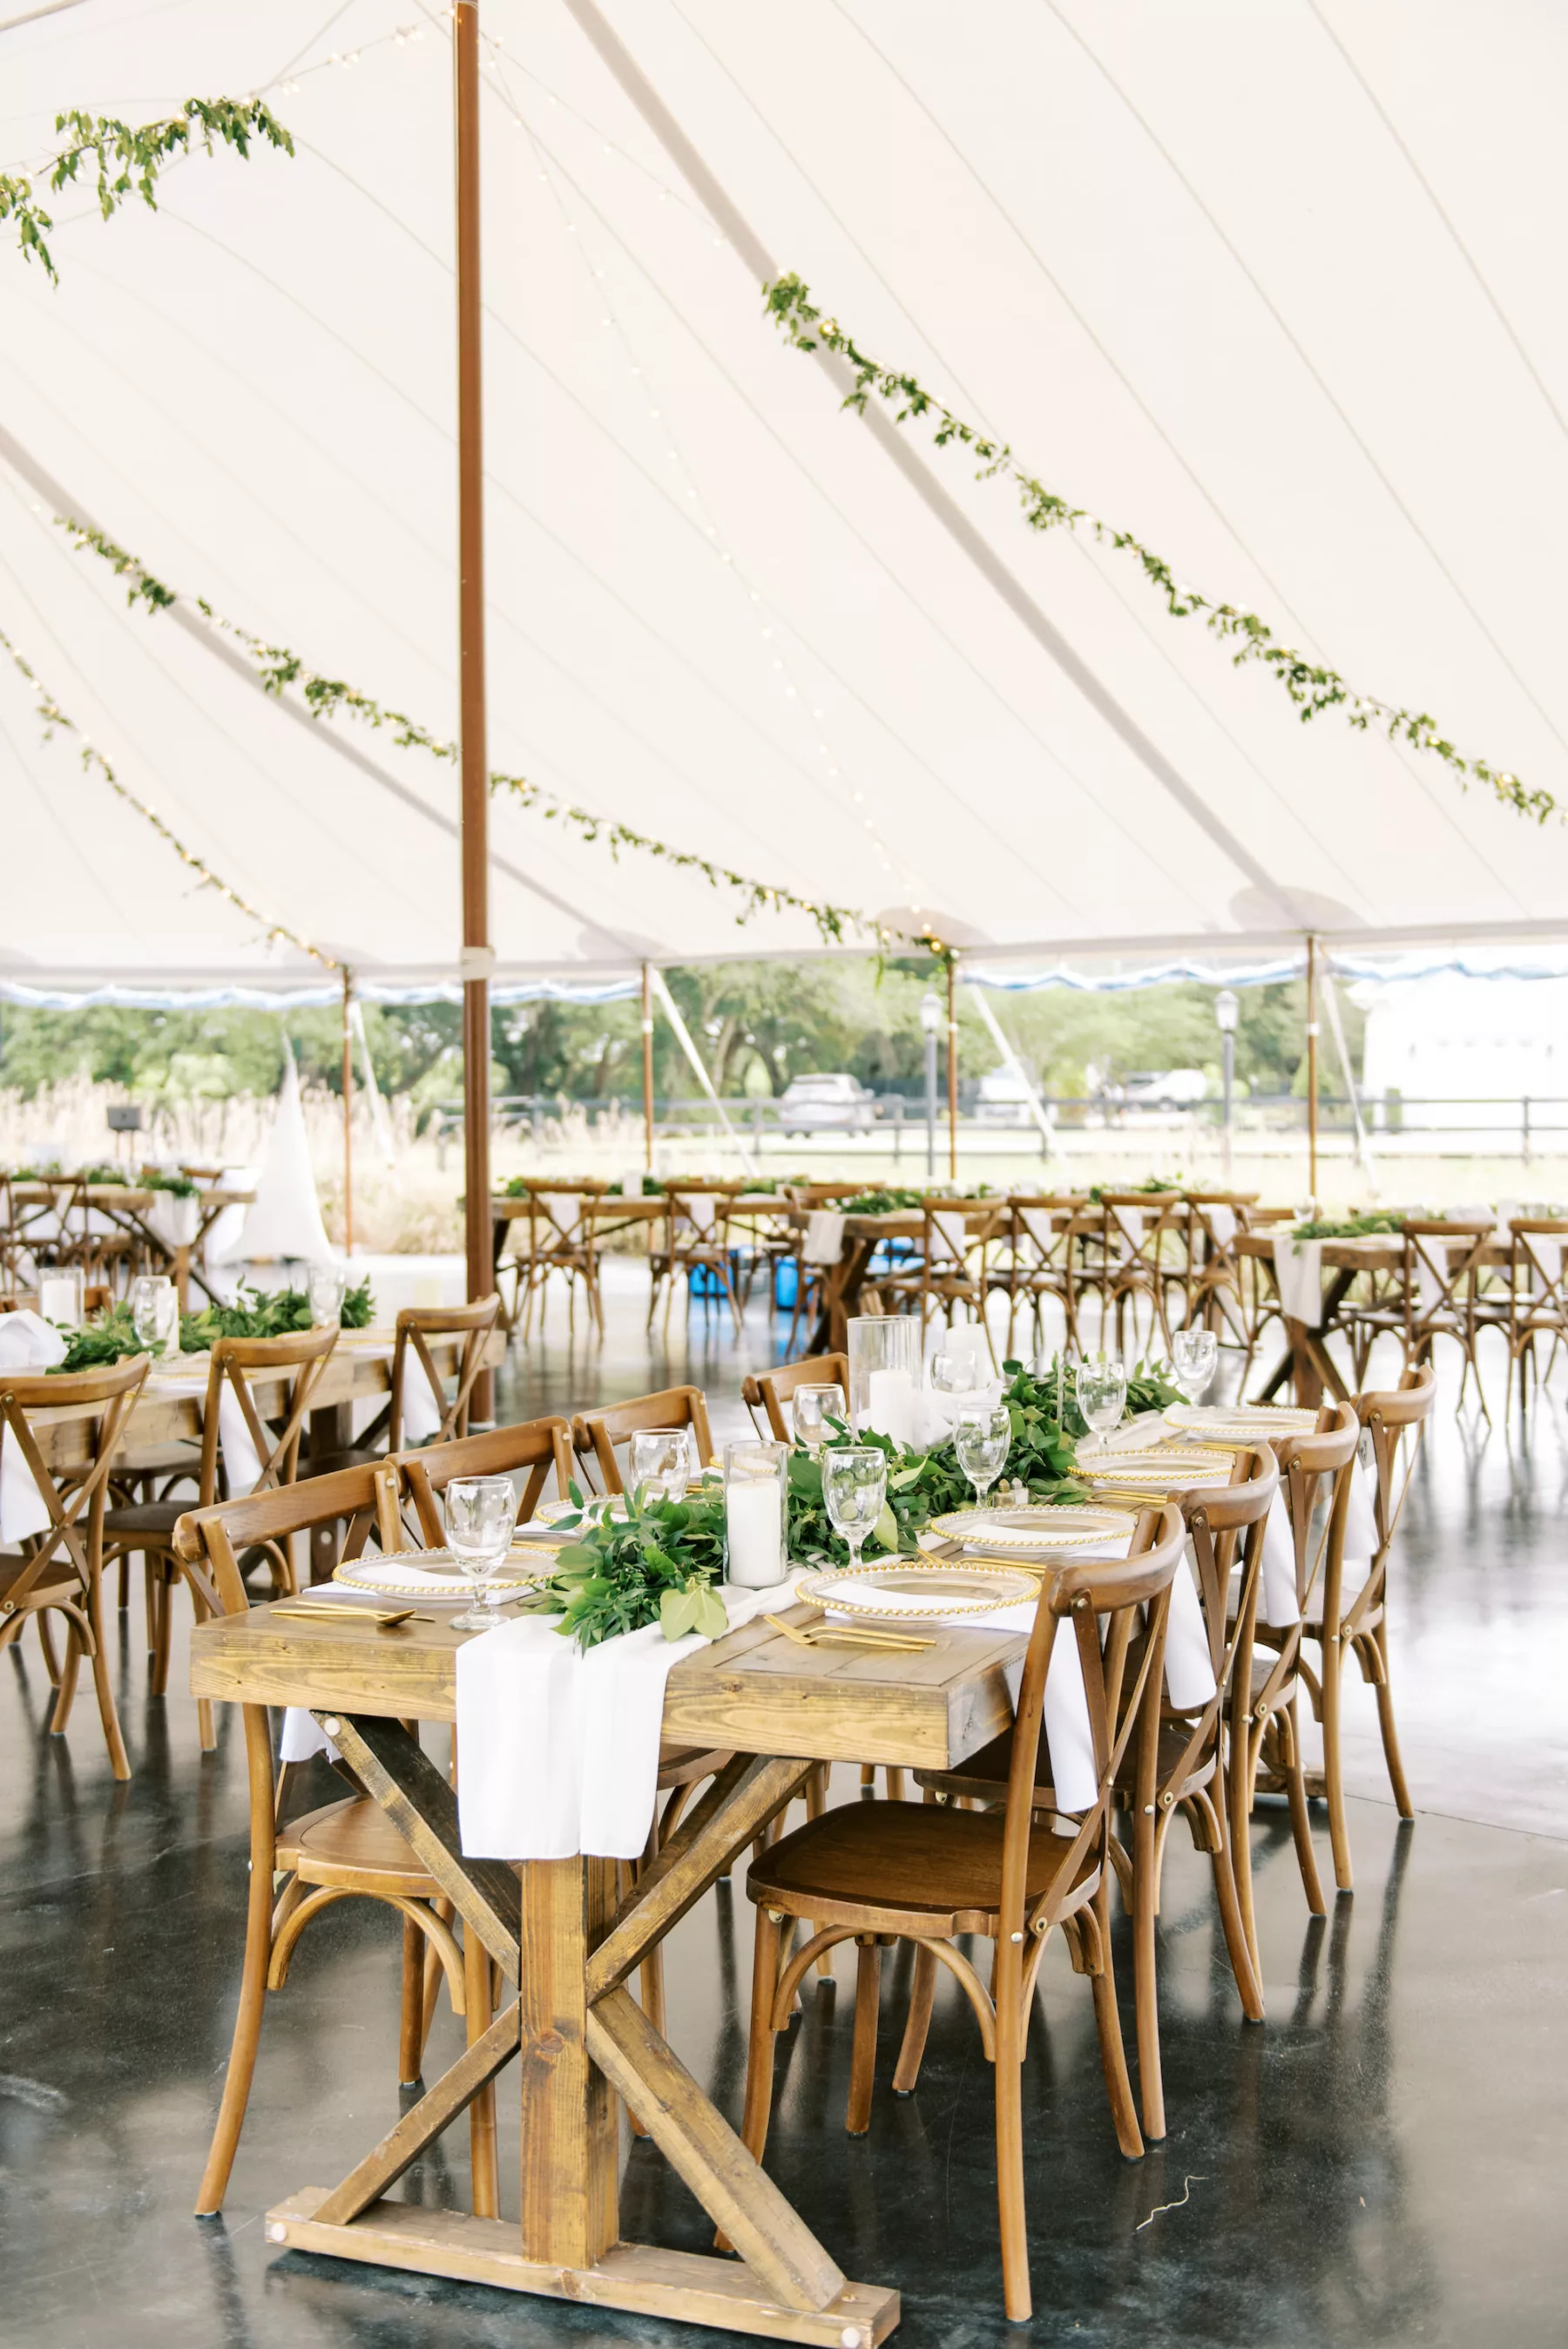 Whimsical Green and White Grand Meadow Tented Wedding Reception Inspiration | Rustic Wooden Tables with Crossback Chairs Ideas | Tampa Bay Event Venue Mill Pond Estate